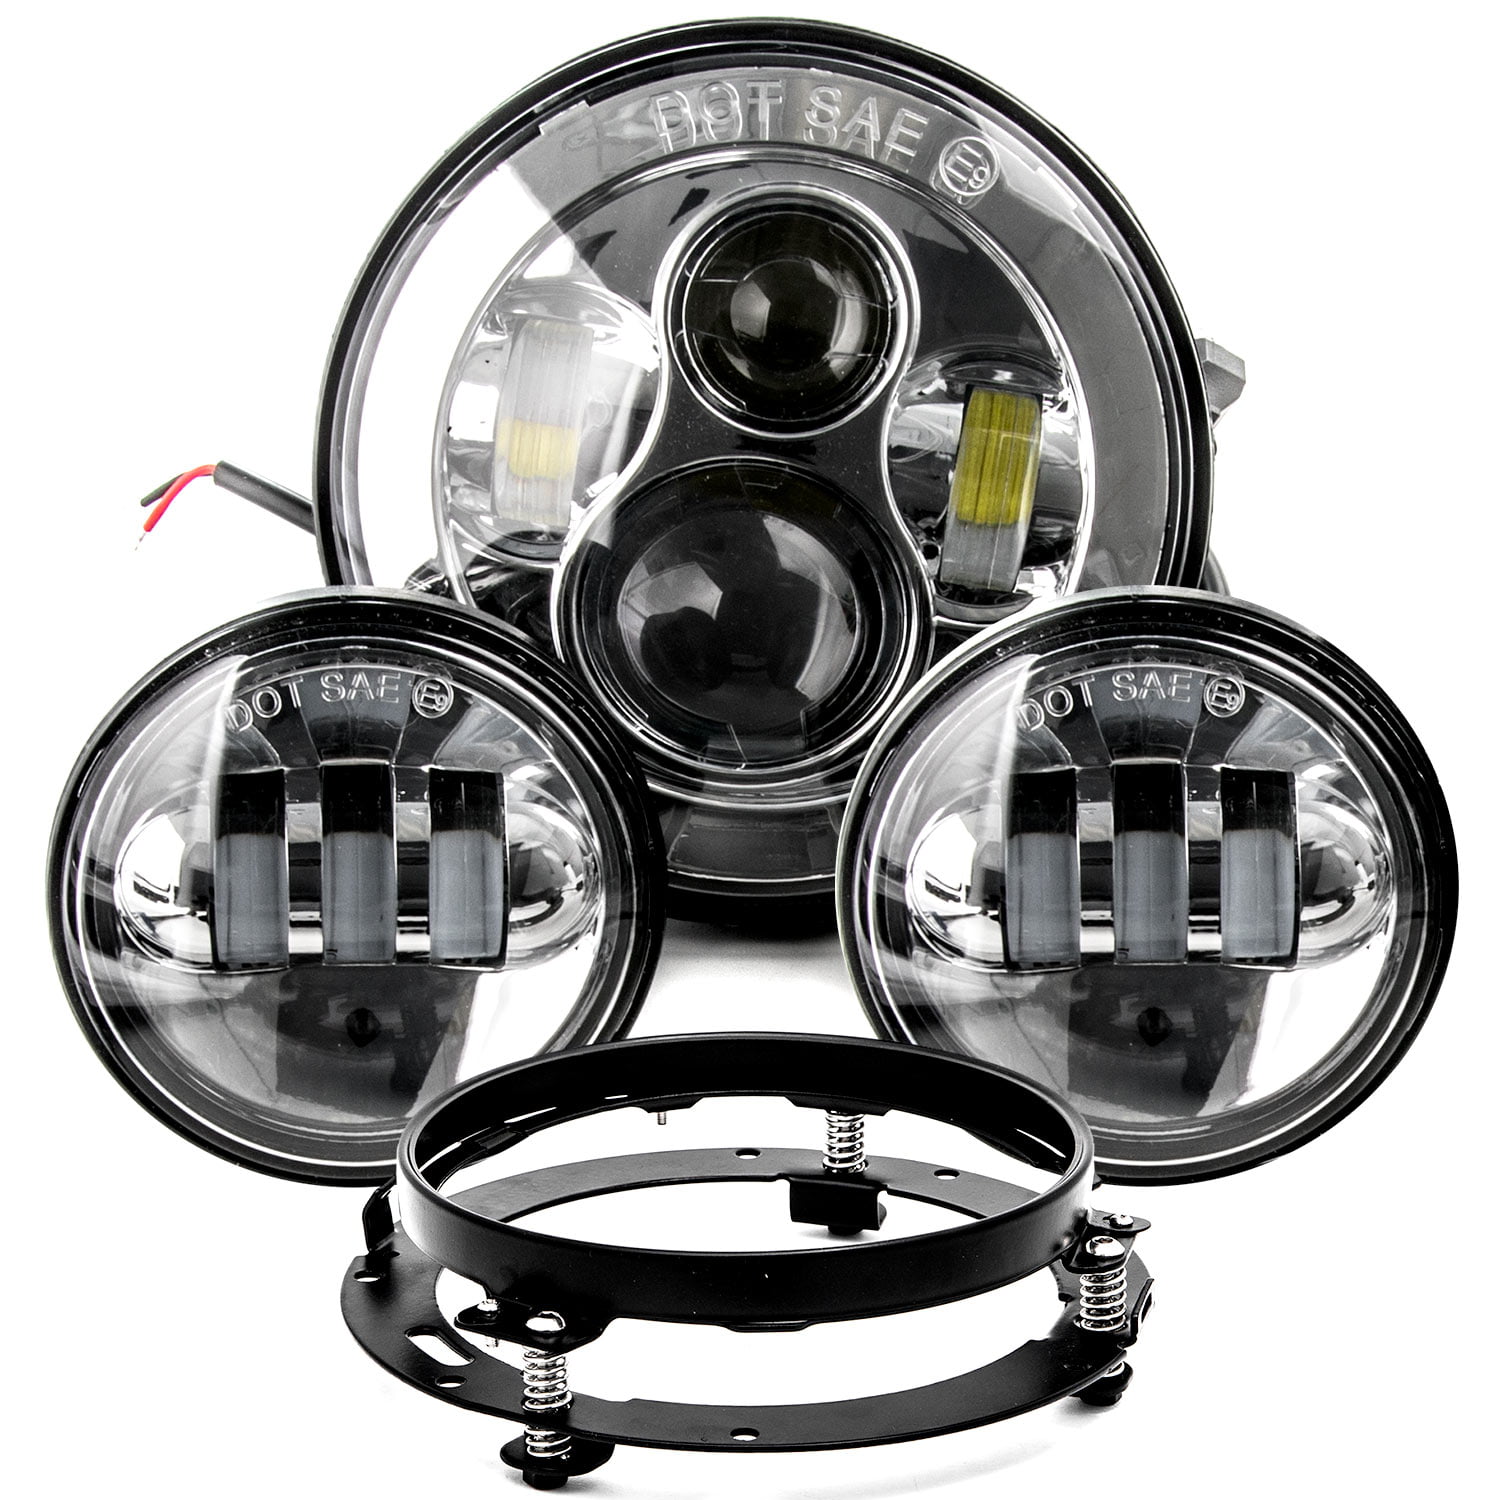 7" Black LED Projector Headlight w/ Passing Lamps For Harley Davidson 